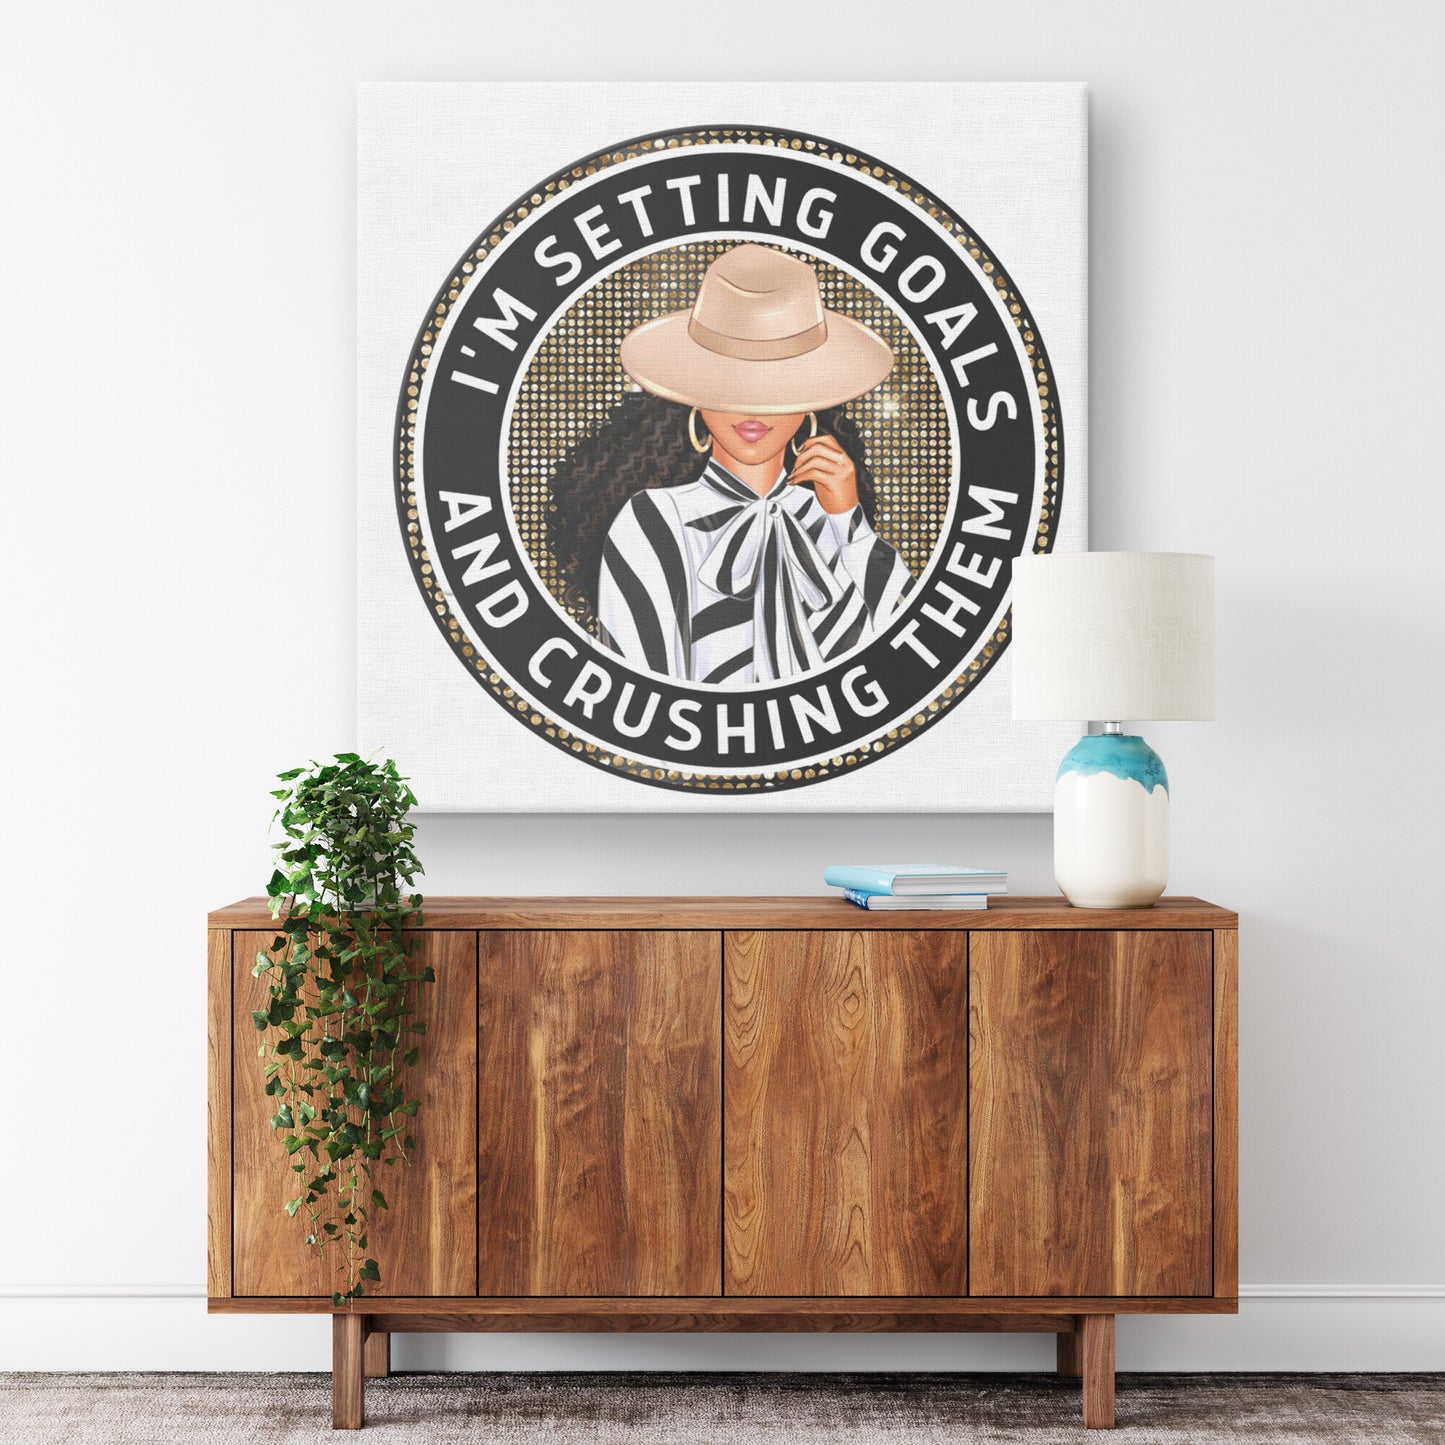 Setting Goals and Crushing Them Canvas, Canva Wall Art , Canva Posters